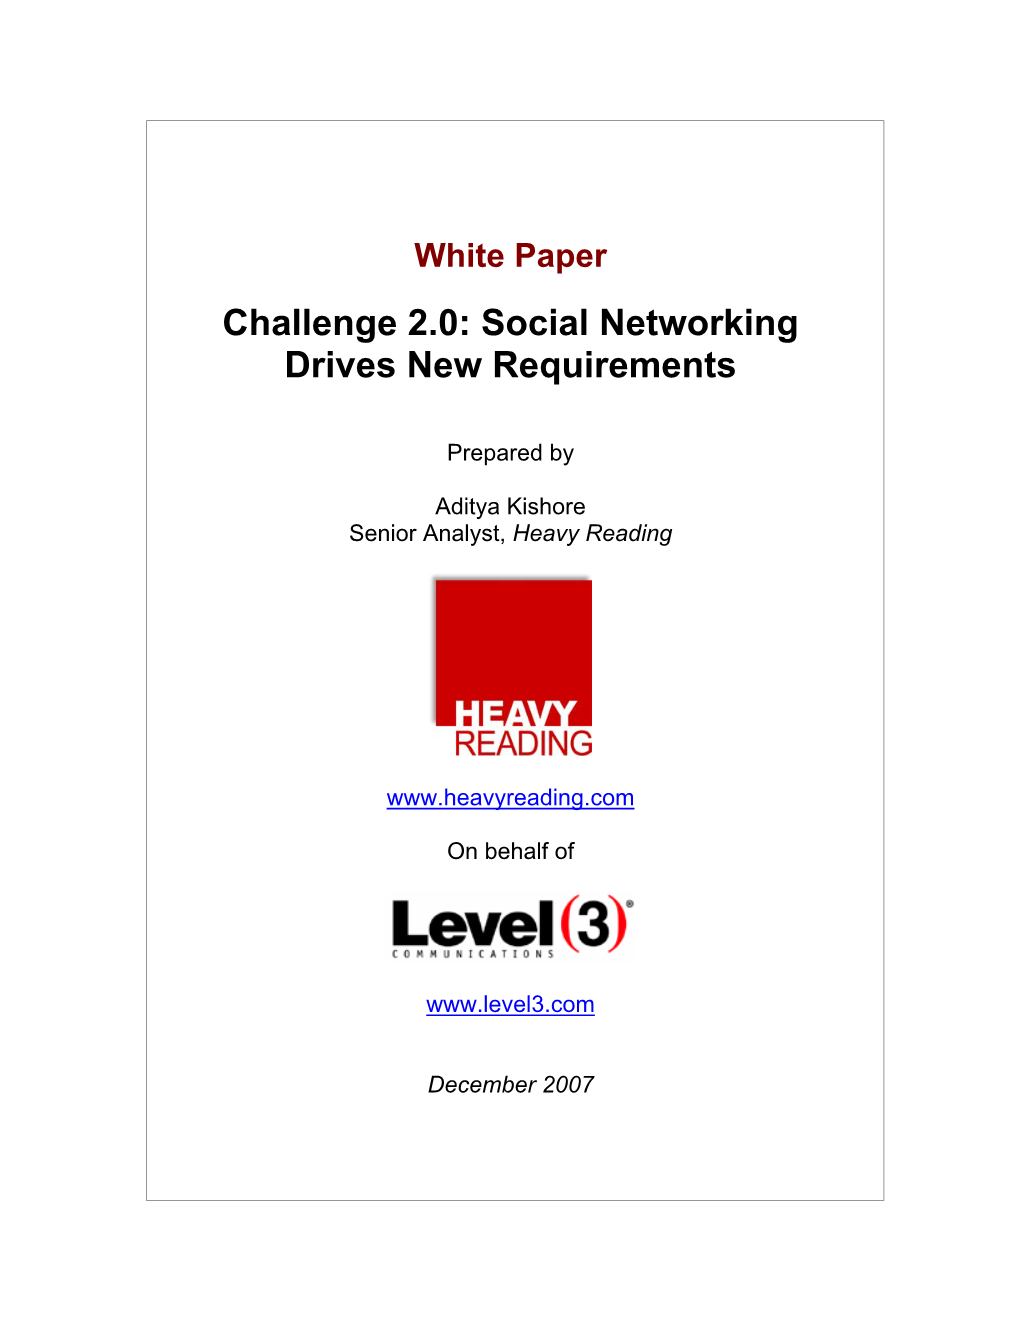 Challenge 2.0: Social Networking Drives New Requirements